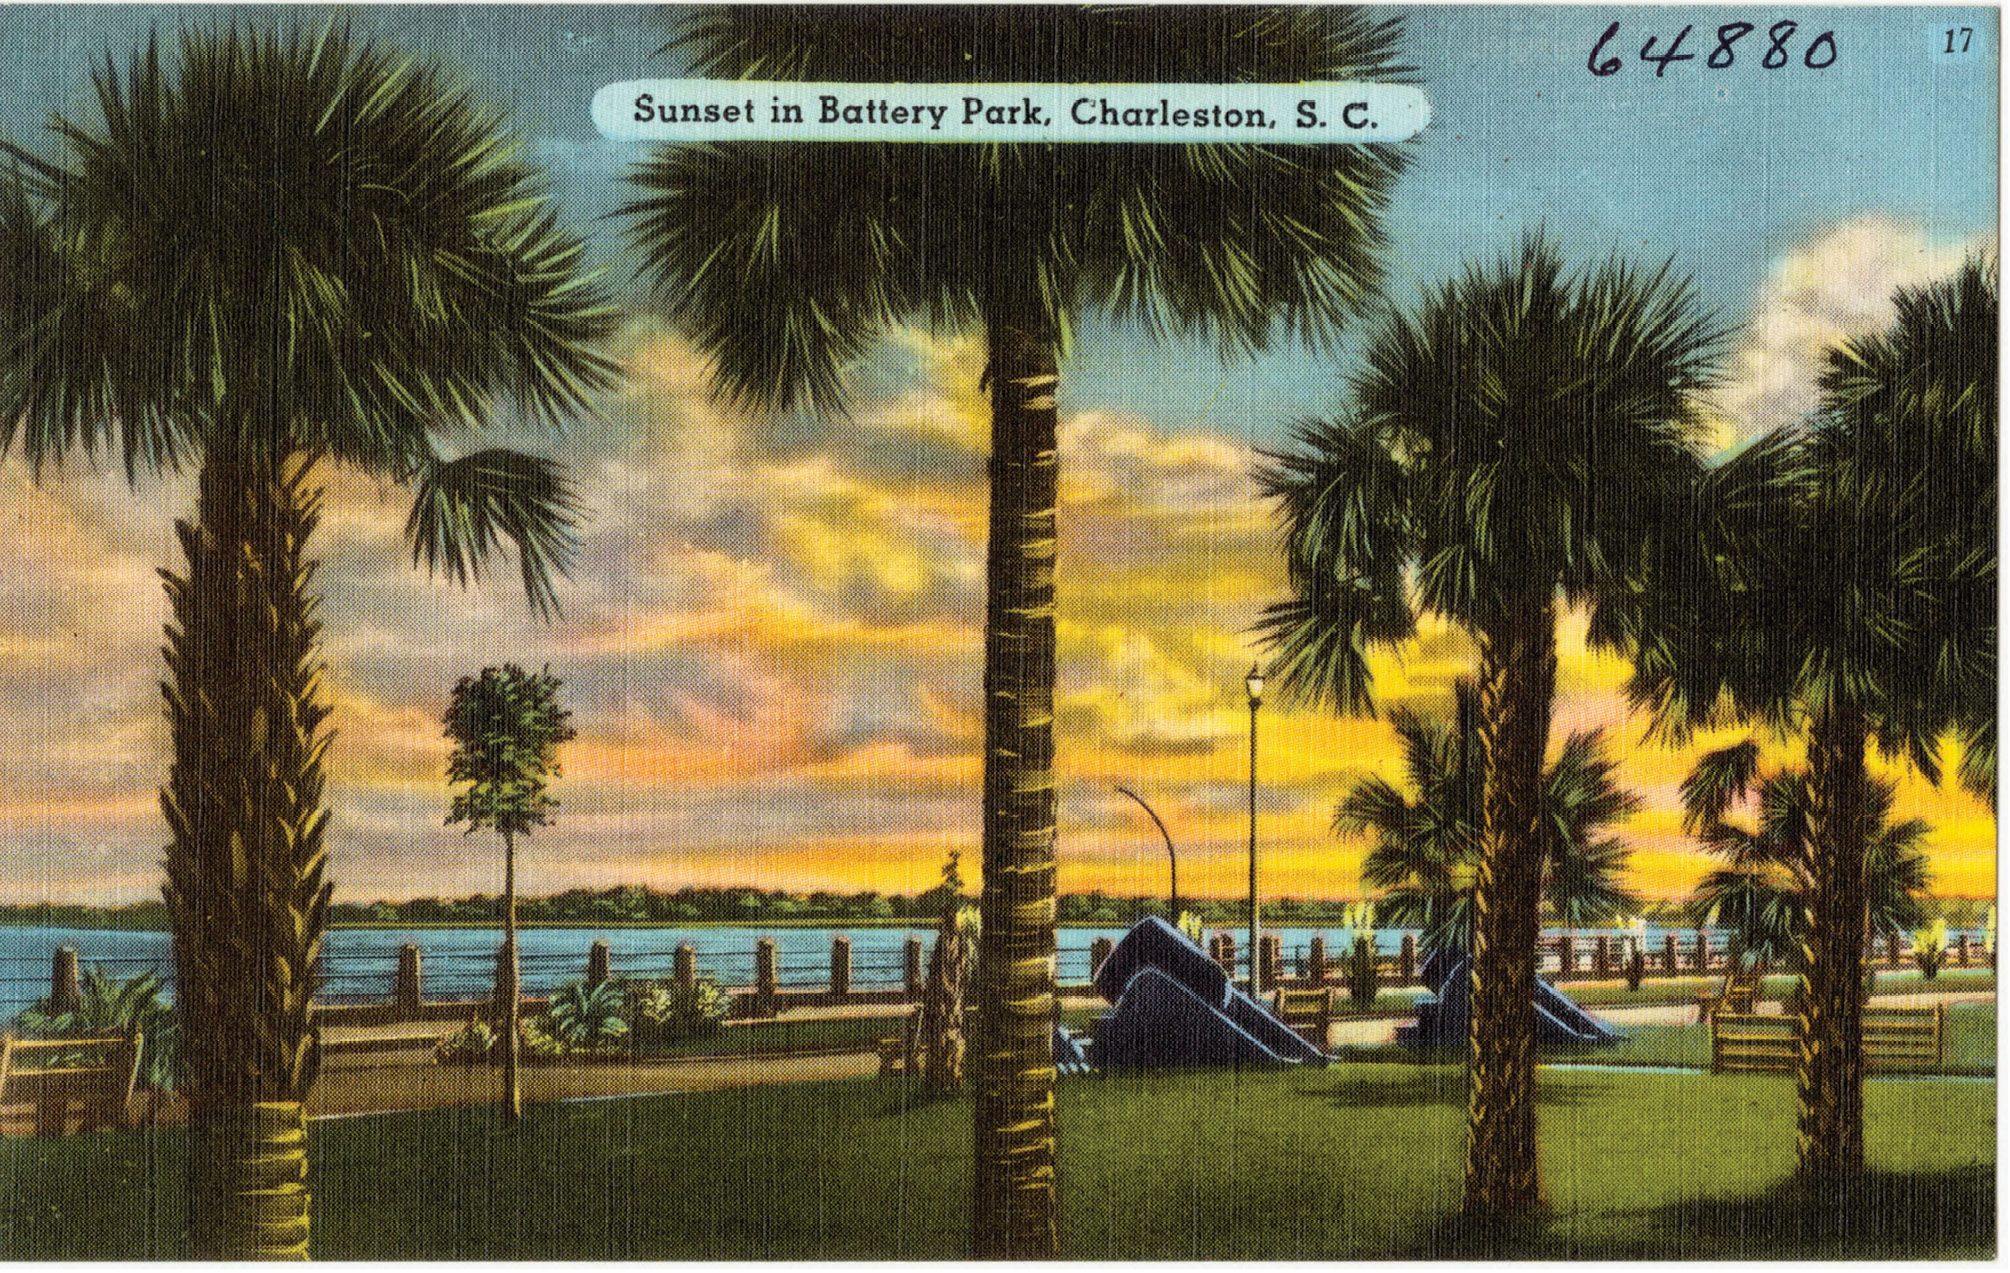 Sunset in Battery Park: “Charleston was founded in 1670. It is a city rich in romance, tradition, and beauty. The famous High Battery is a delightful summer boulevard, park, and promenade along the city’s waterfront. This is a particularly beautiful scene of the silhouetted palms and sunset.”